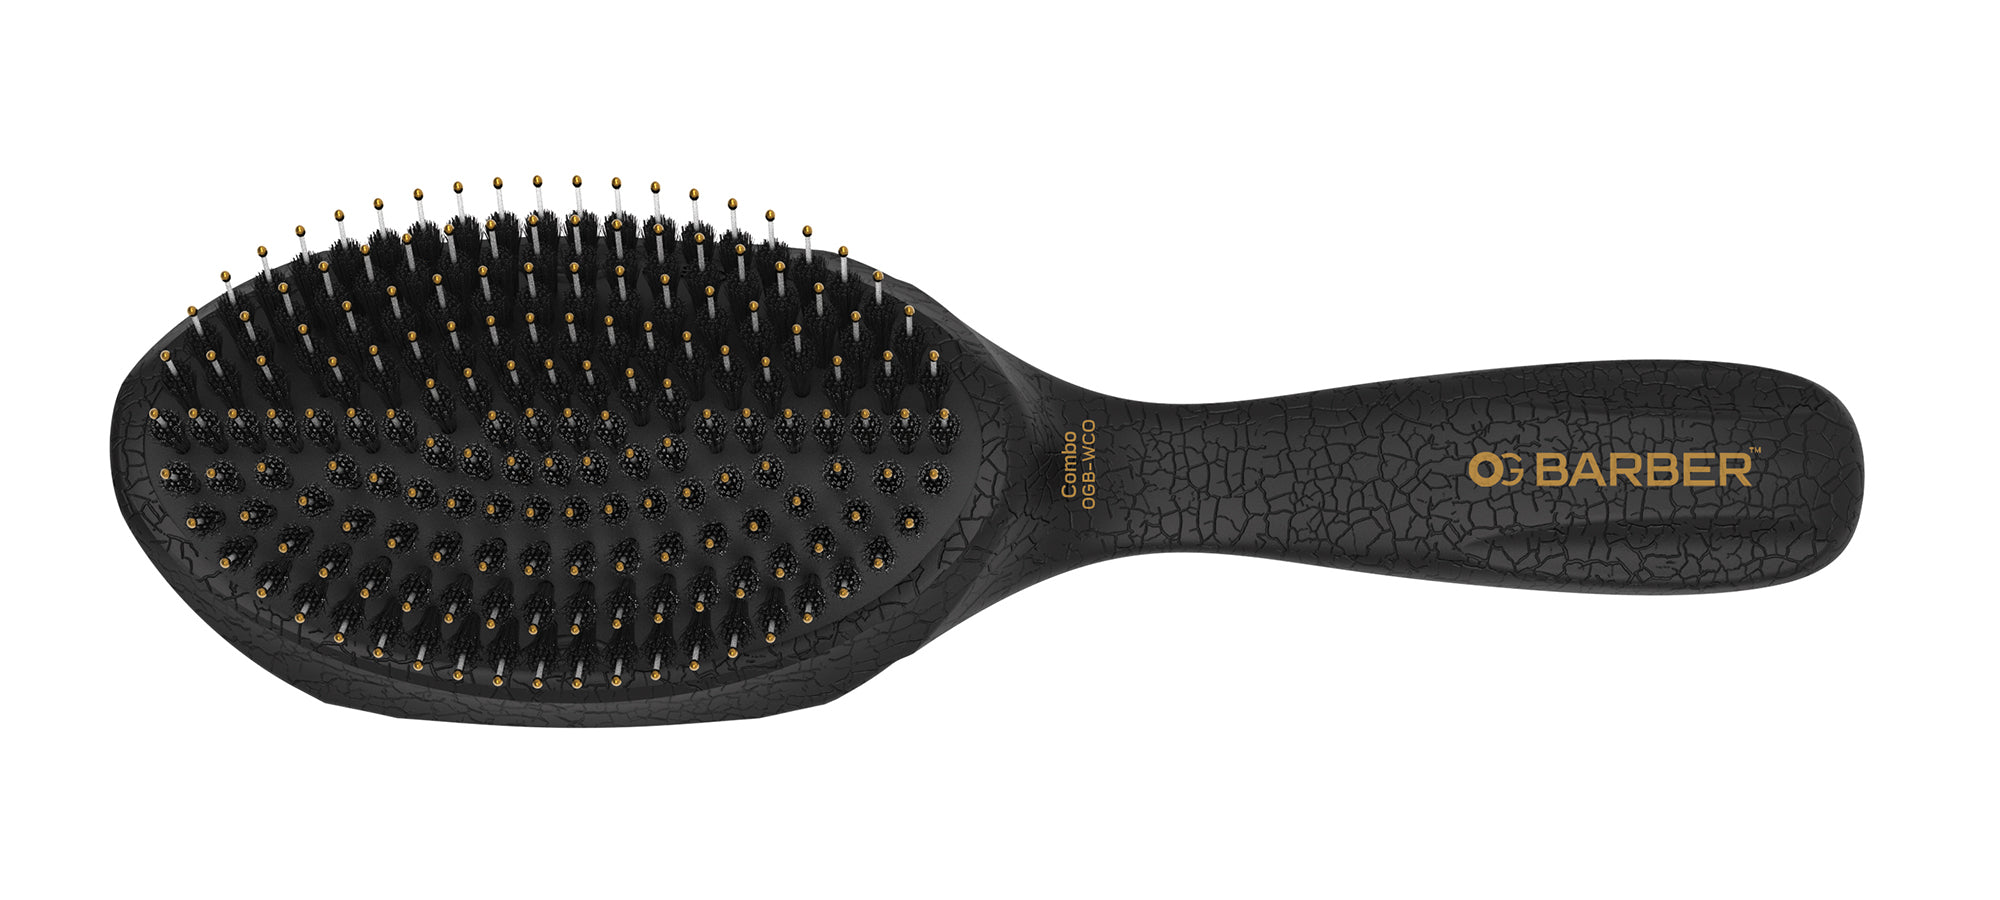 Olivia Garden Expands Their OG Brush Collection to Feature Eco-Friendly  Brushes Made From 100% Recycled Plastic